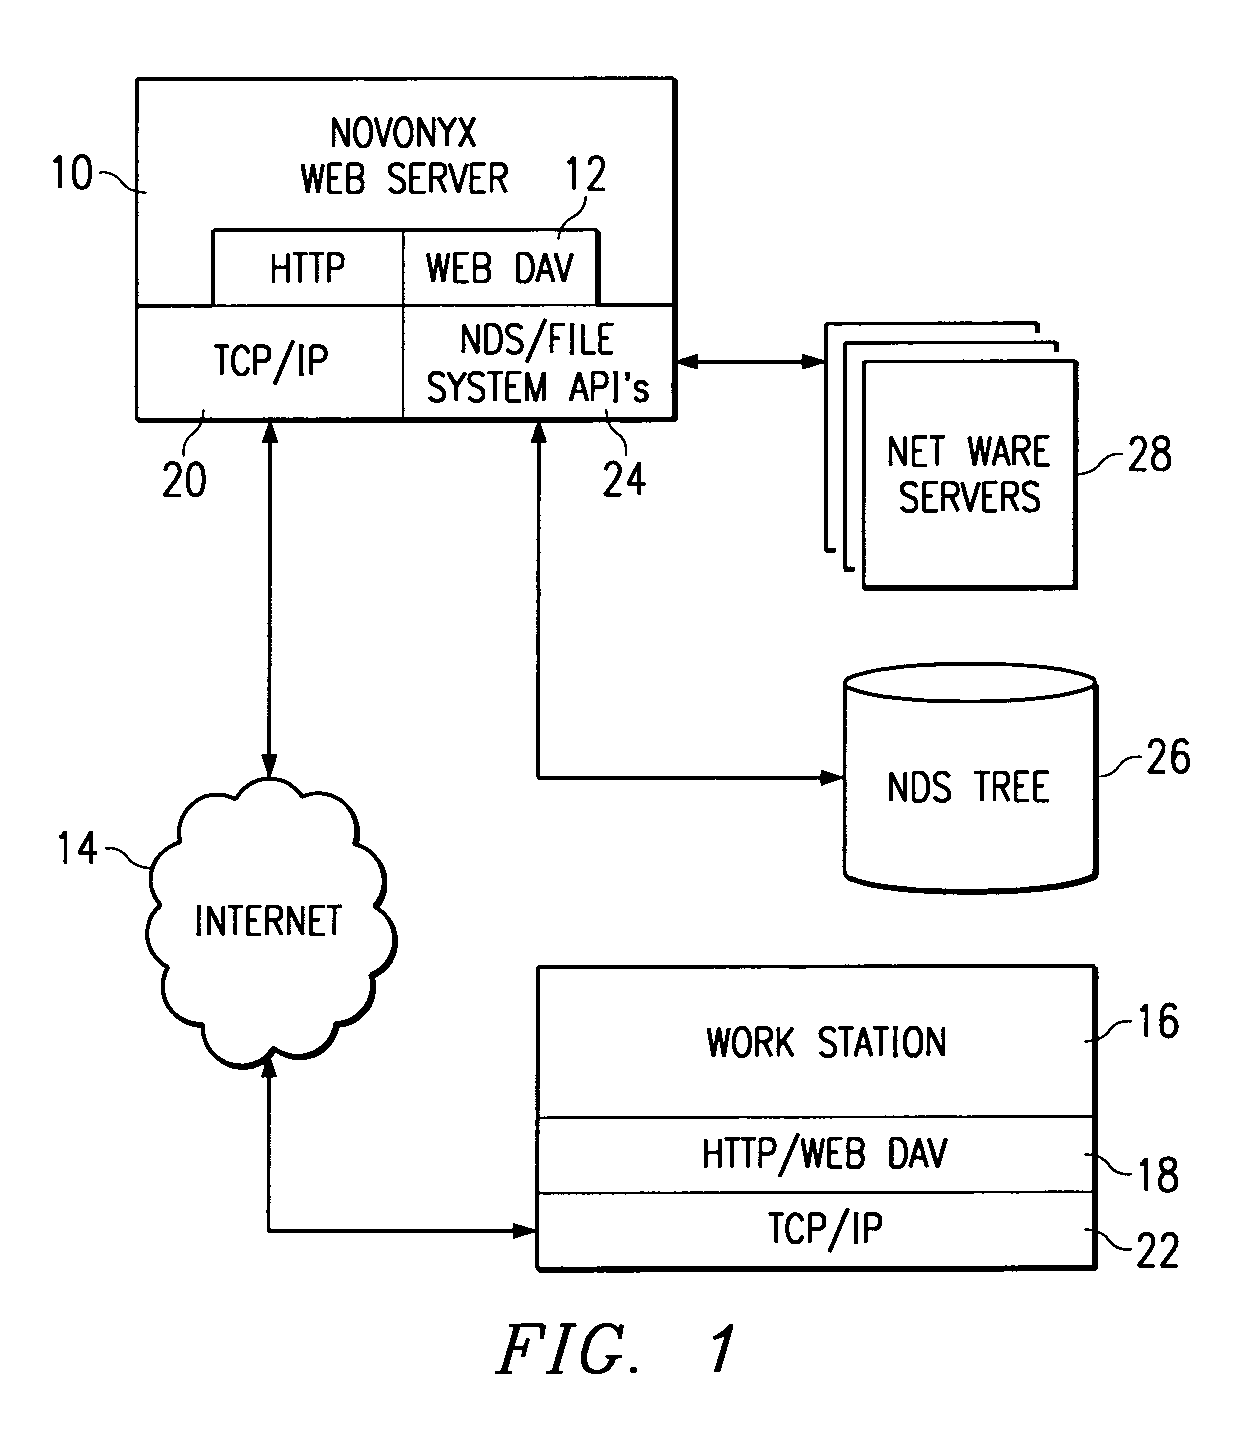 Method and apparatus for exposing network administration stored in a directory using HTTP/WebDAV protocol